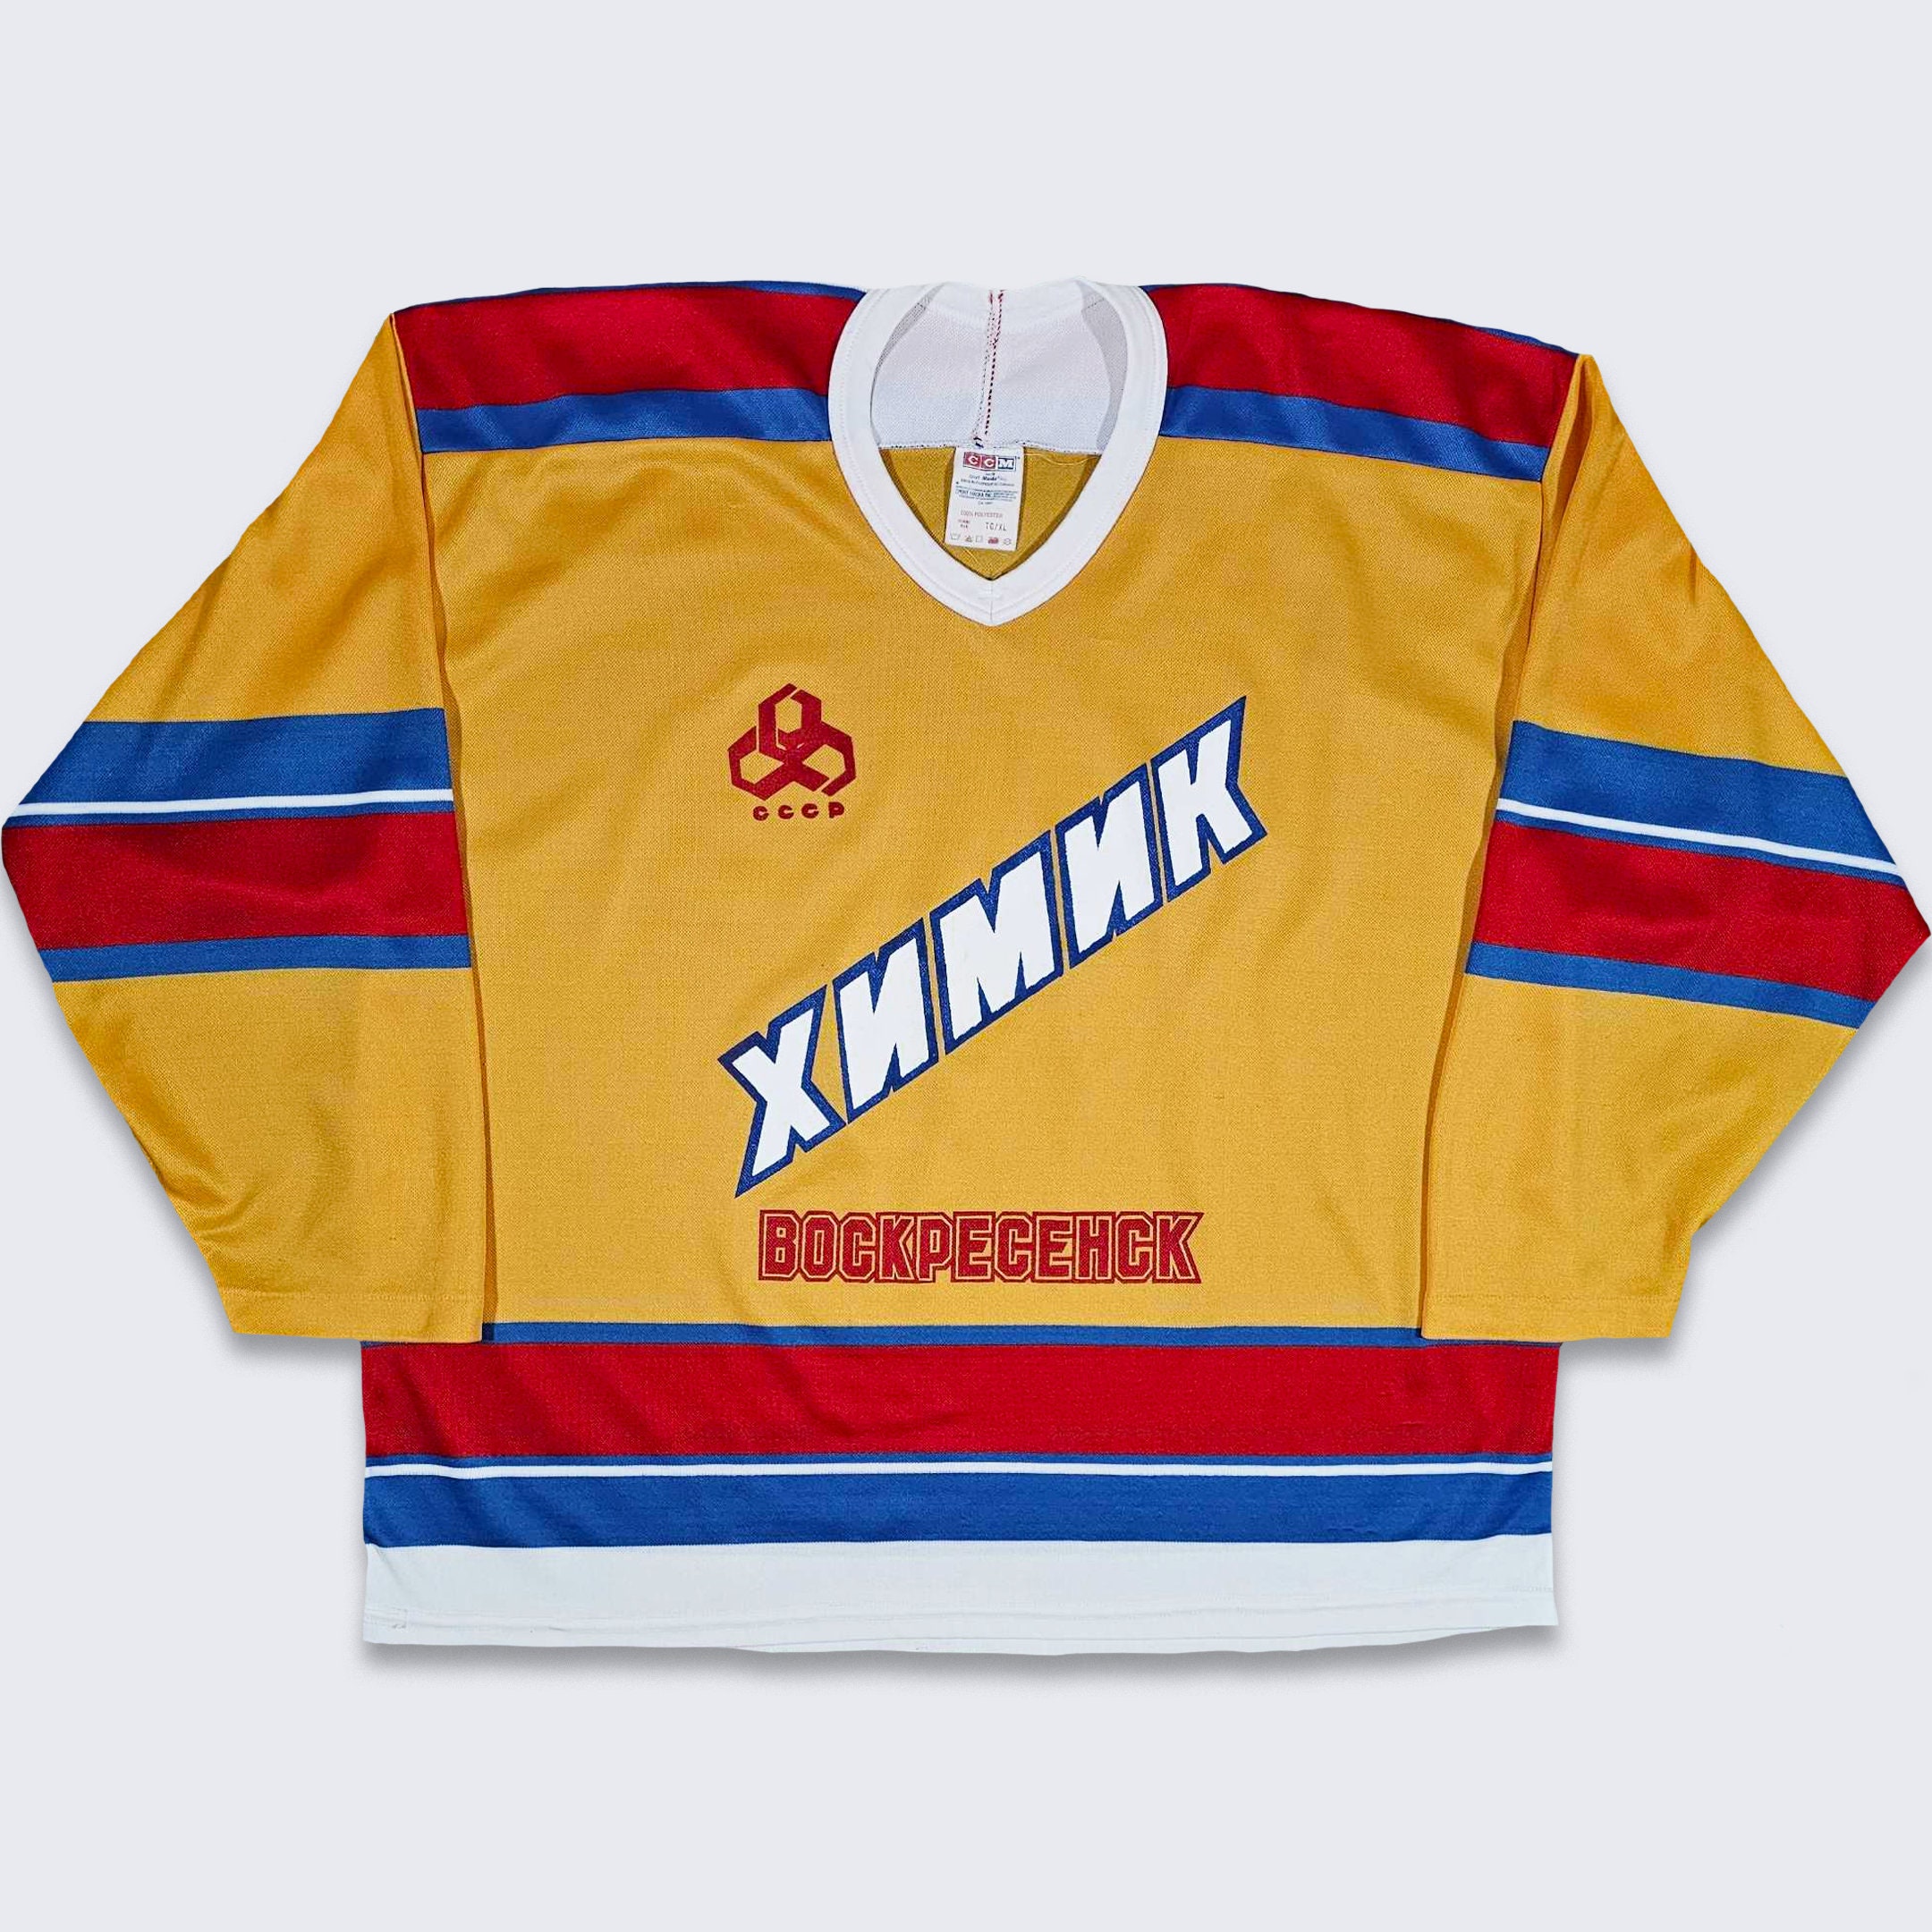 Anyone know if you can still get one of these cccp jerseys from